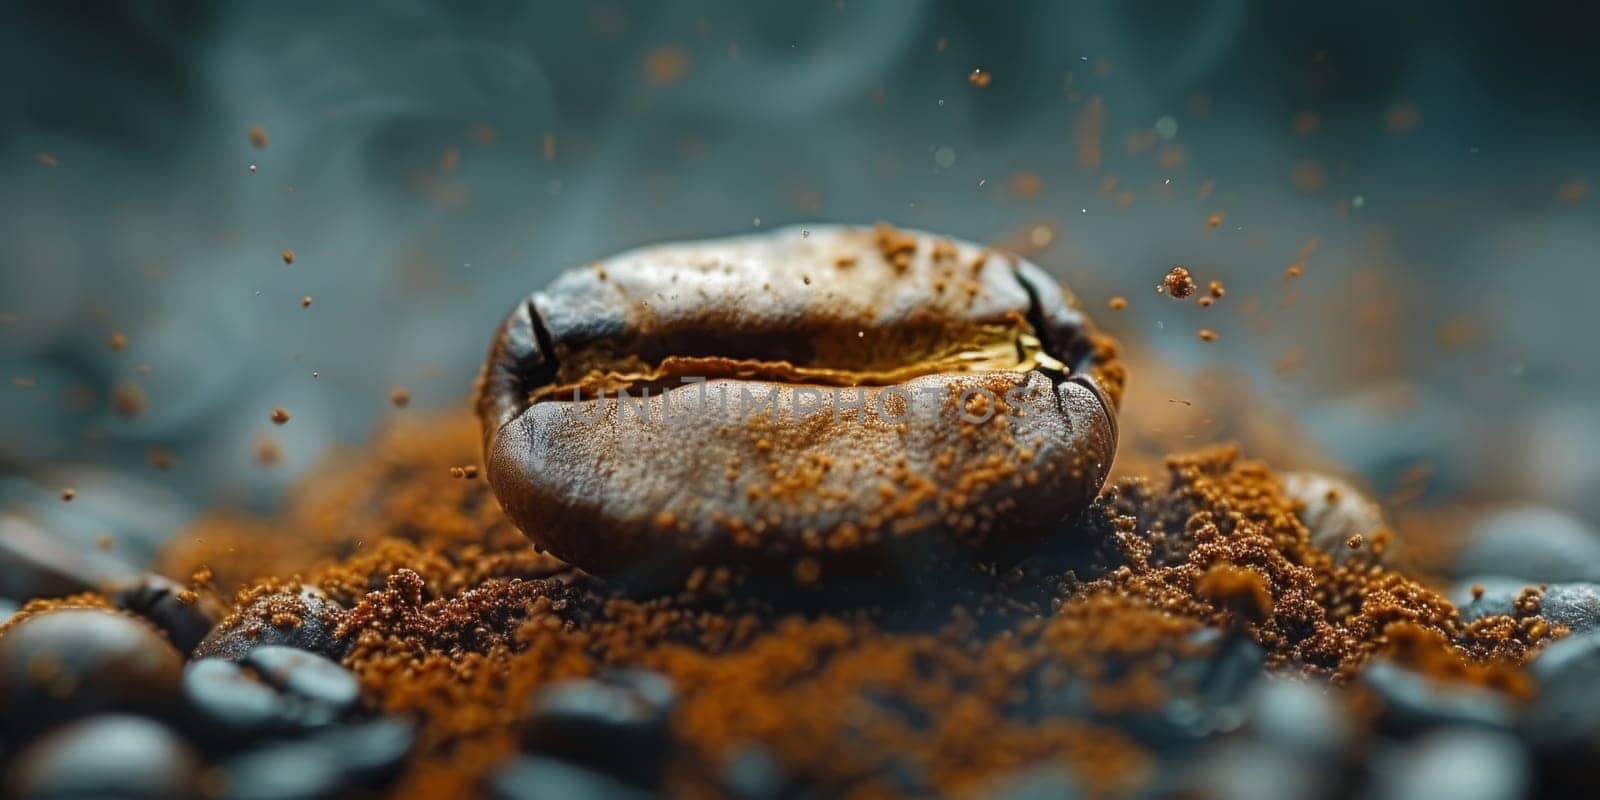 Extreme macro photography of fresh roasted coffee beans by Benzoix